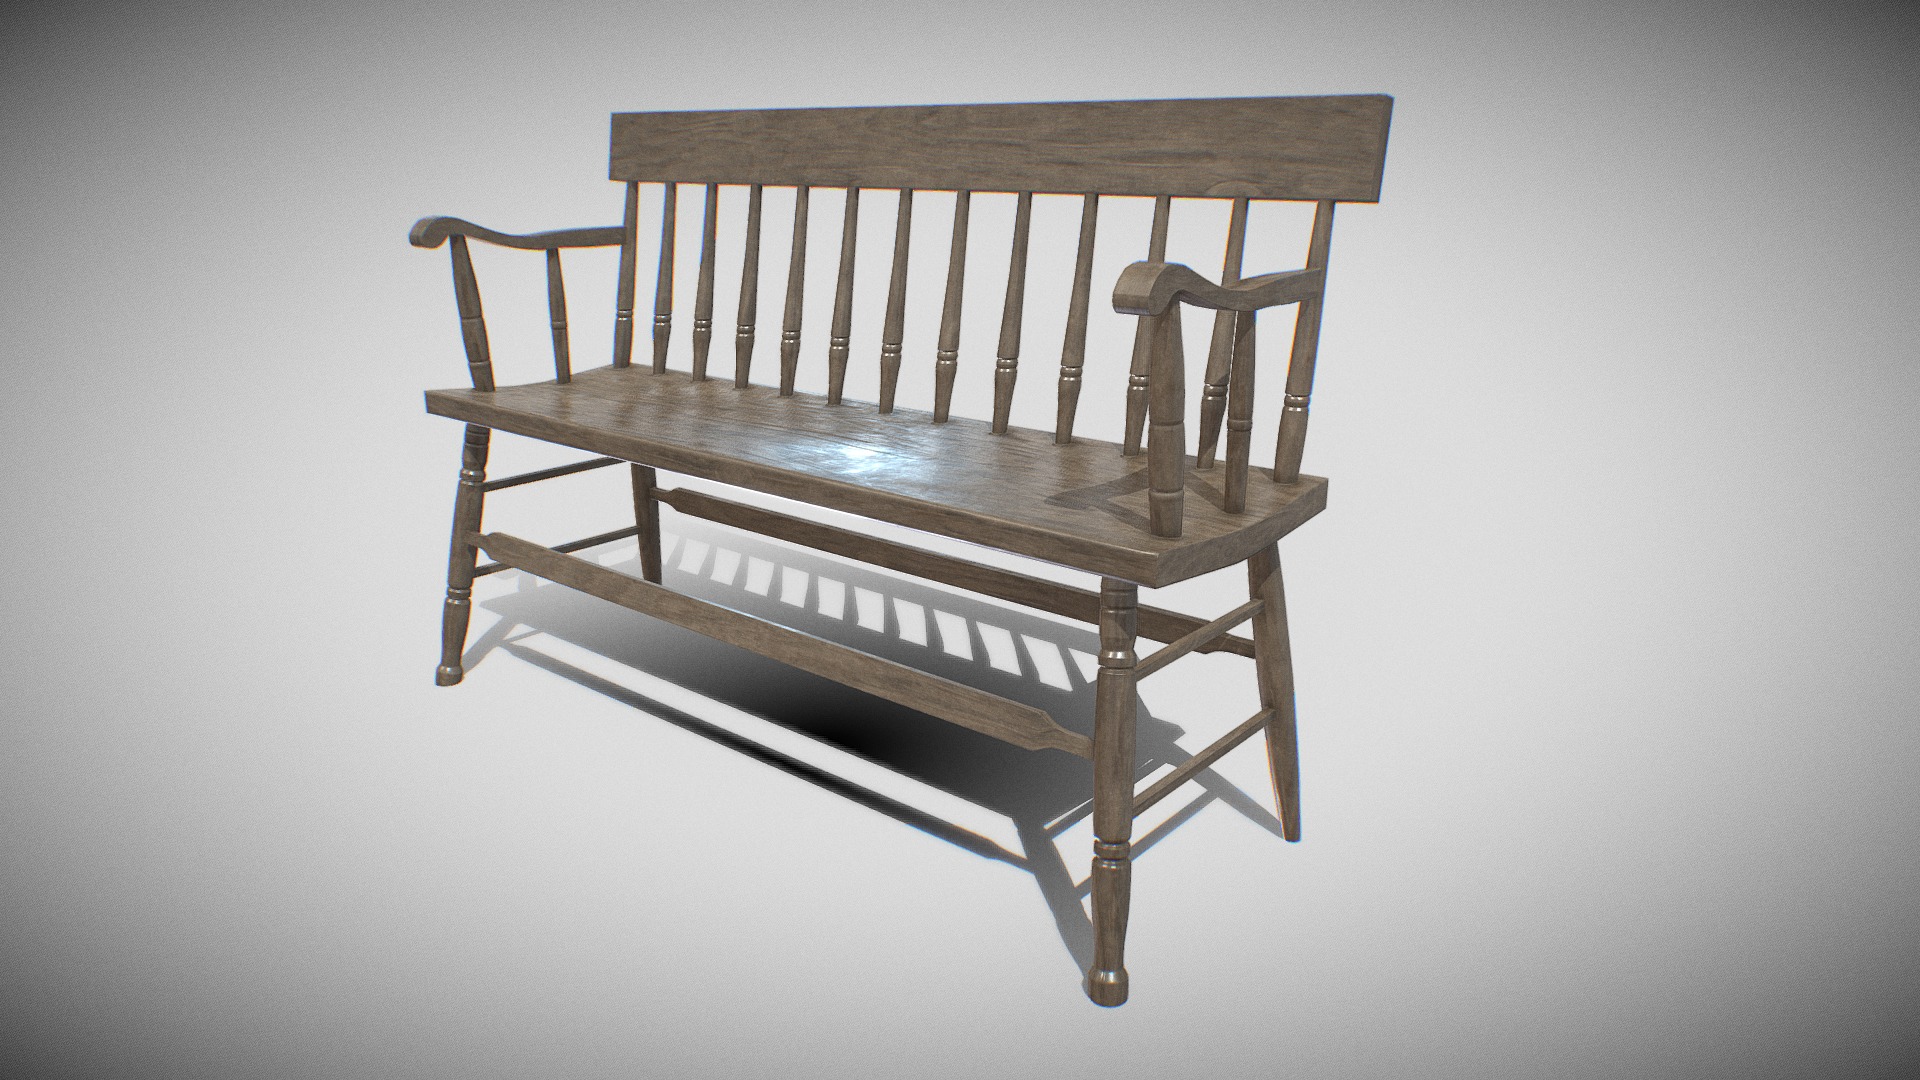 3D model Furniture Bench V-03 - This is a 3D model of the Furniture Bench V-03. The 3D model is about a wooden bench with a seat.